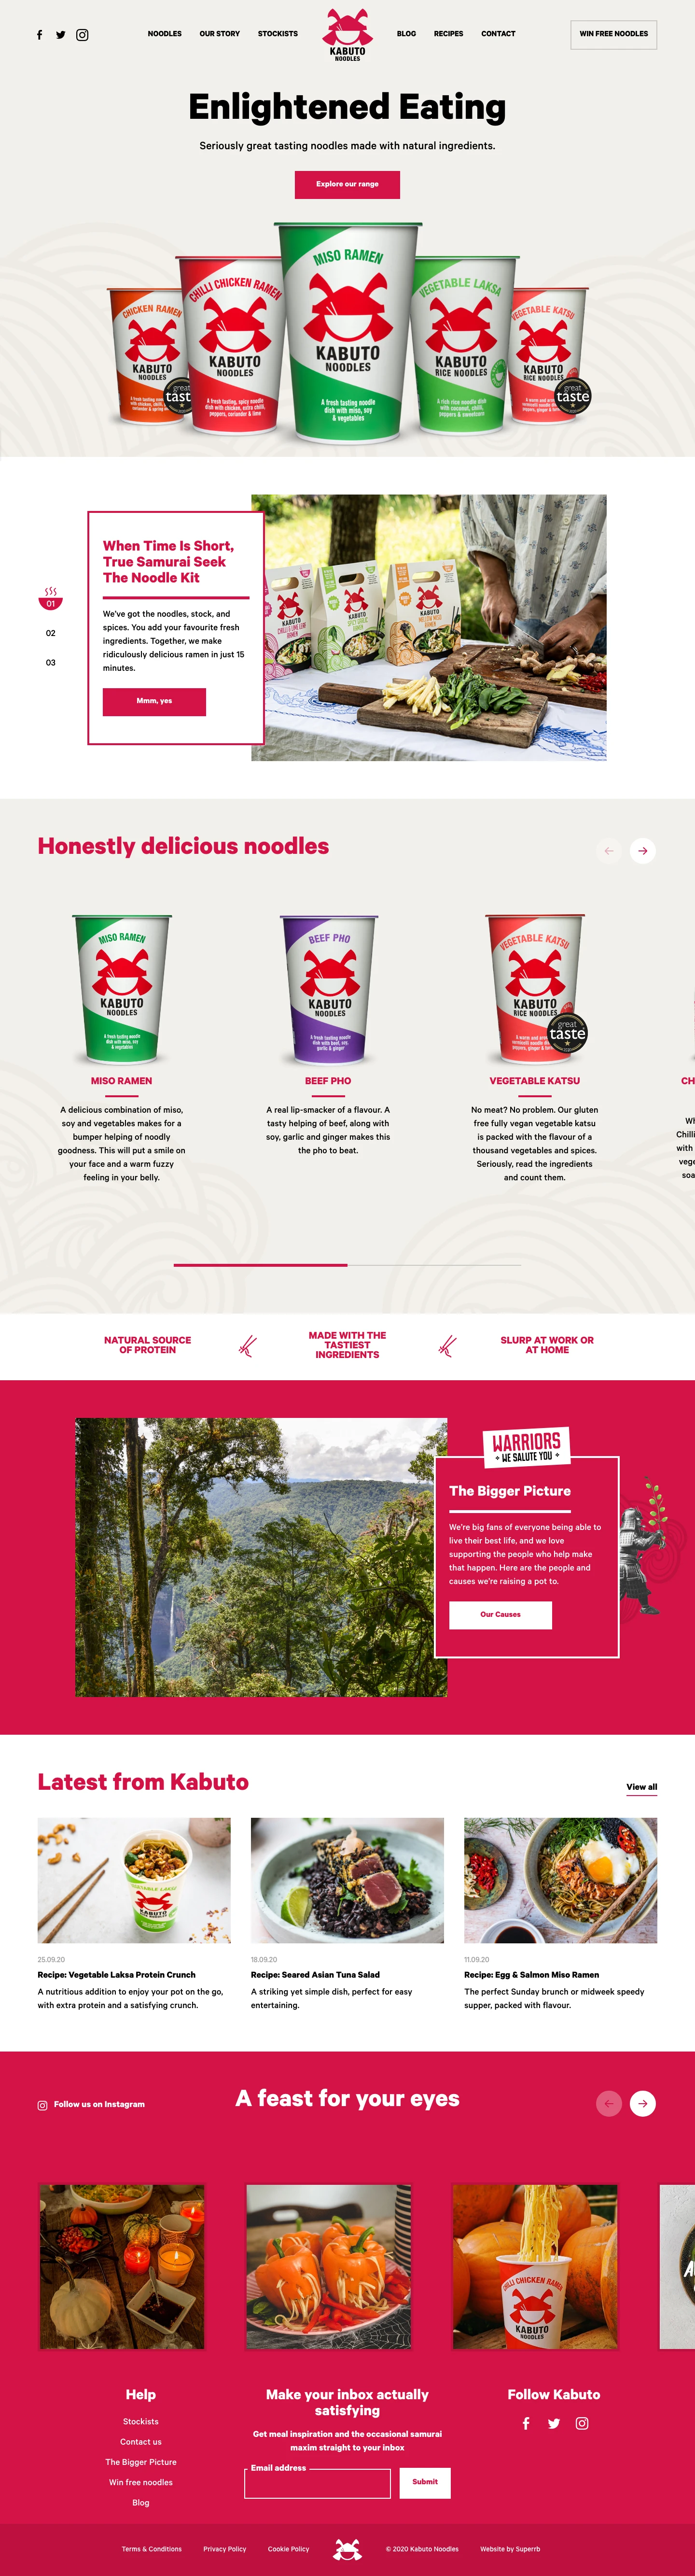 Kabuto Noodles Landing Page Example: Eat the noodles your taste buds deserve. Seriously great tasting noodles made with quality natural ingredients. Inspired by authentic, healthy recipes from across Asia.